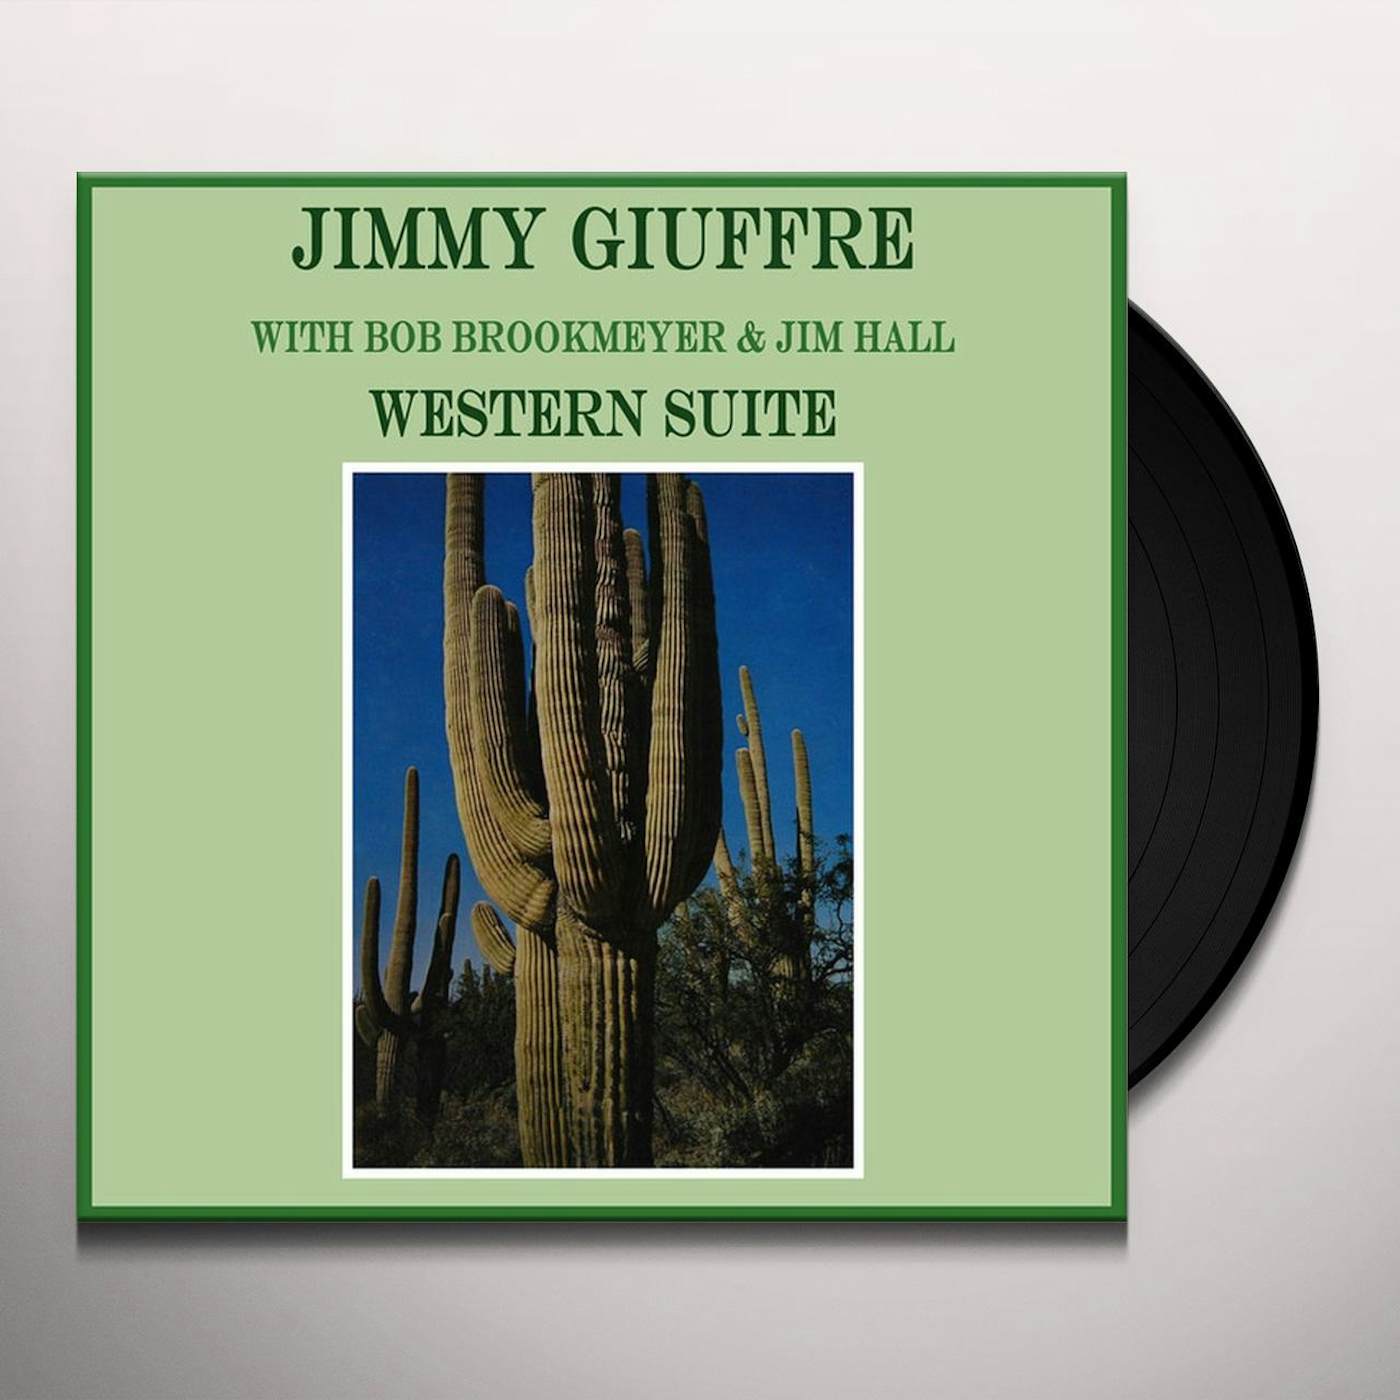 Jimmy Giuffre Western Suite Vinyl Record